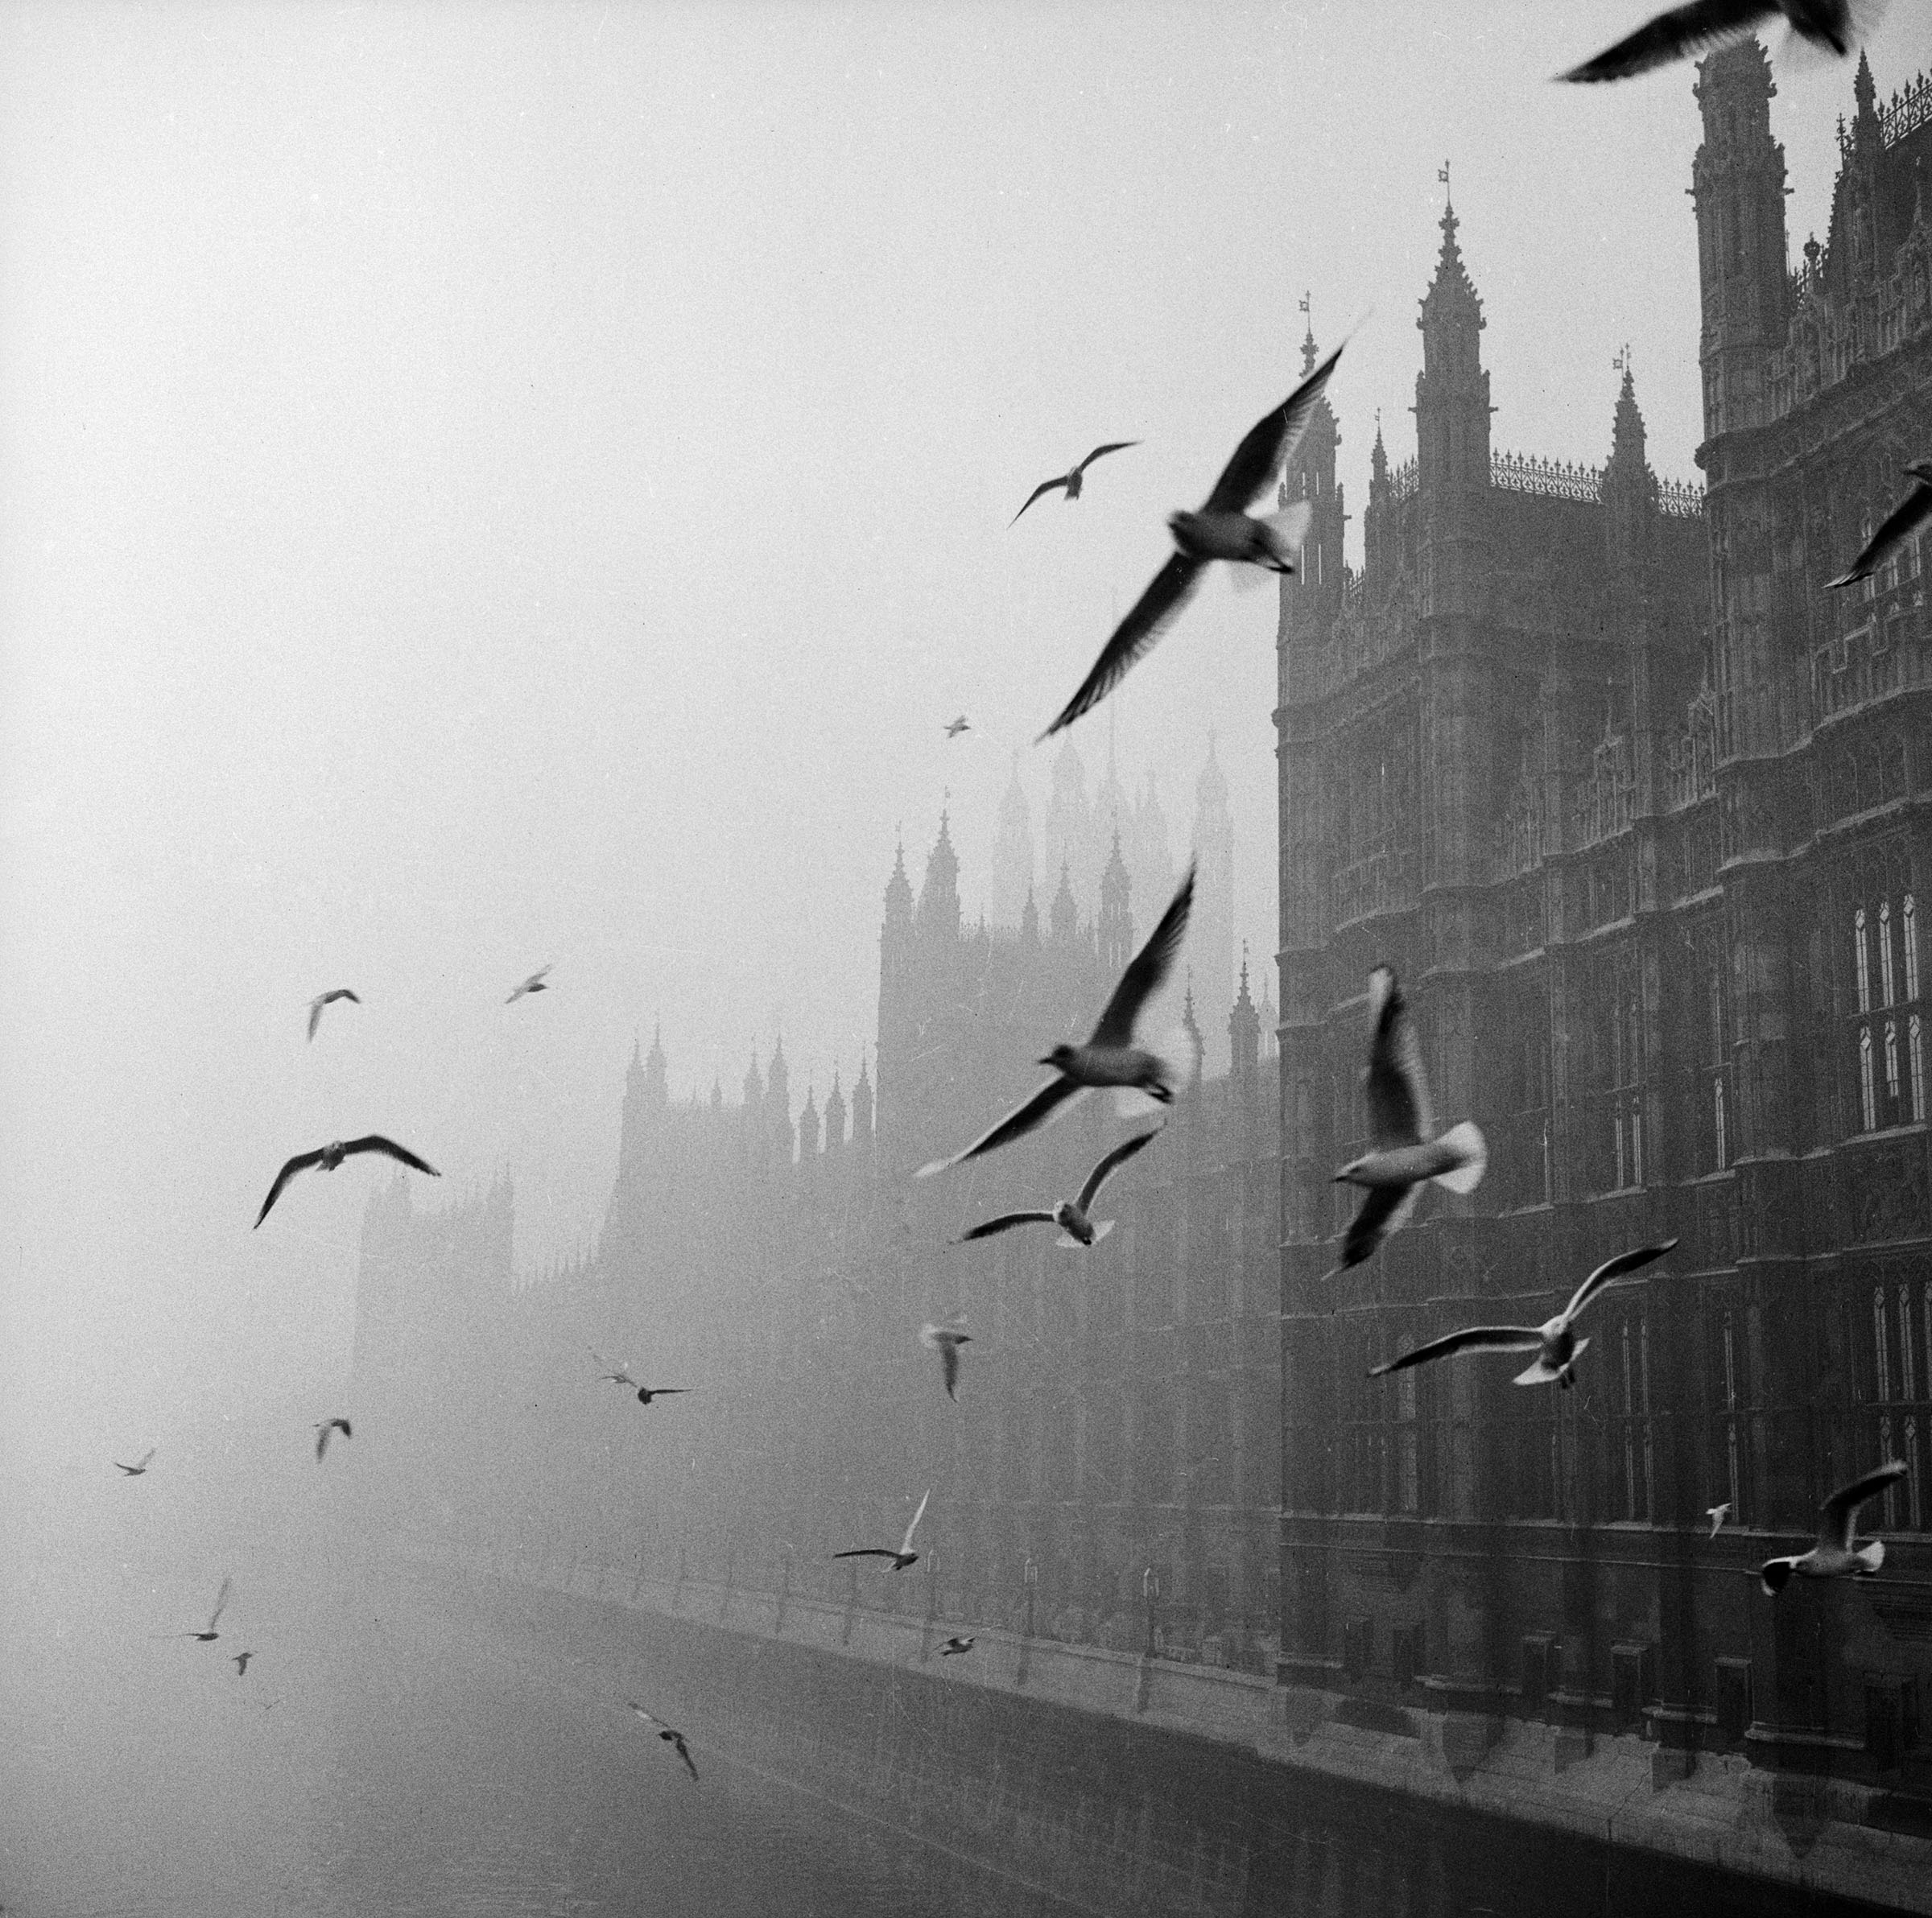 Black and white photo of the Houses of Parliament in the fog with birds flying past